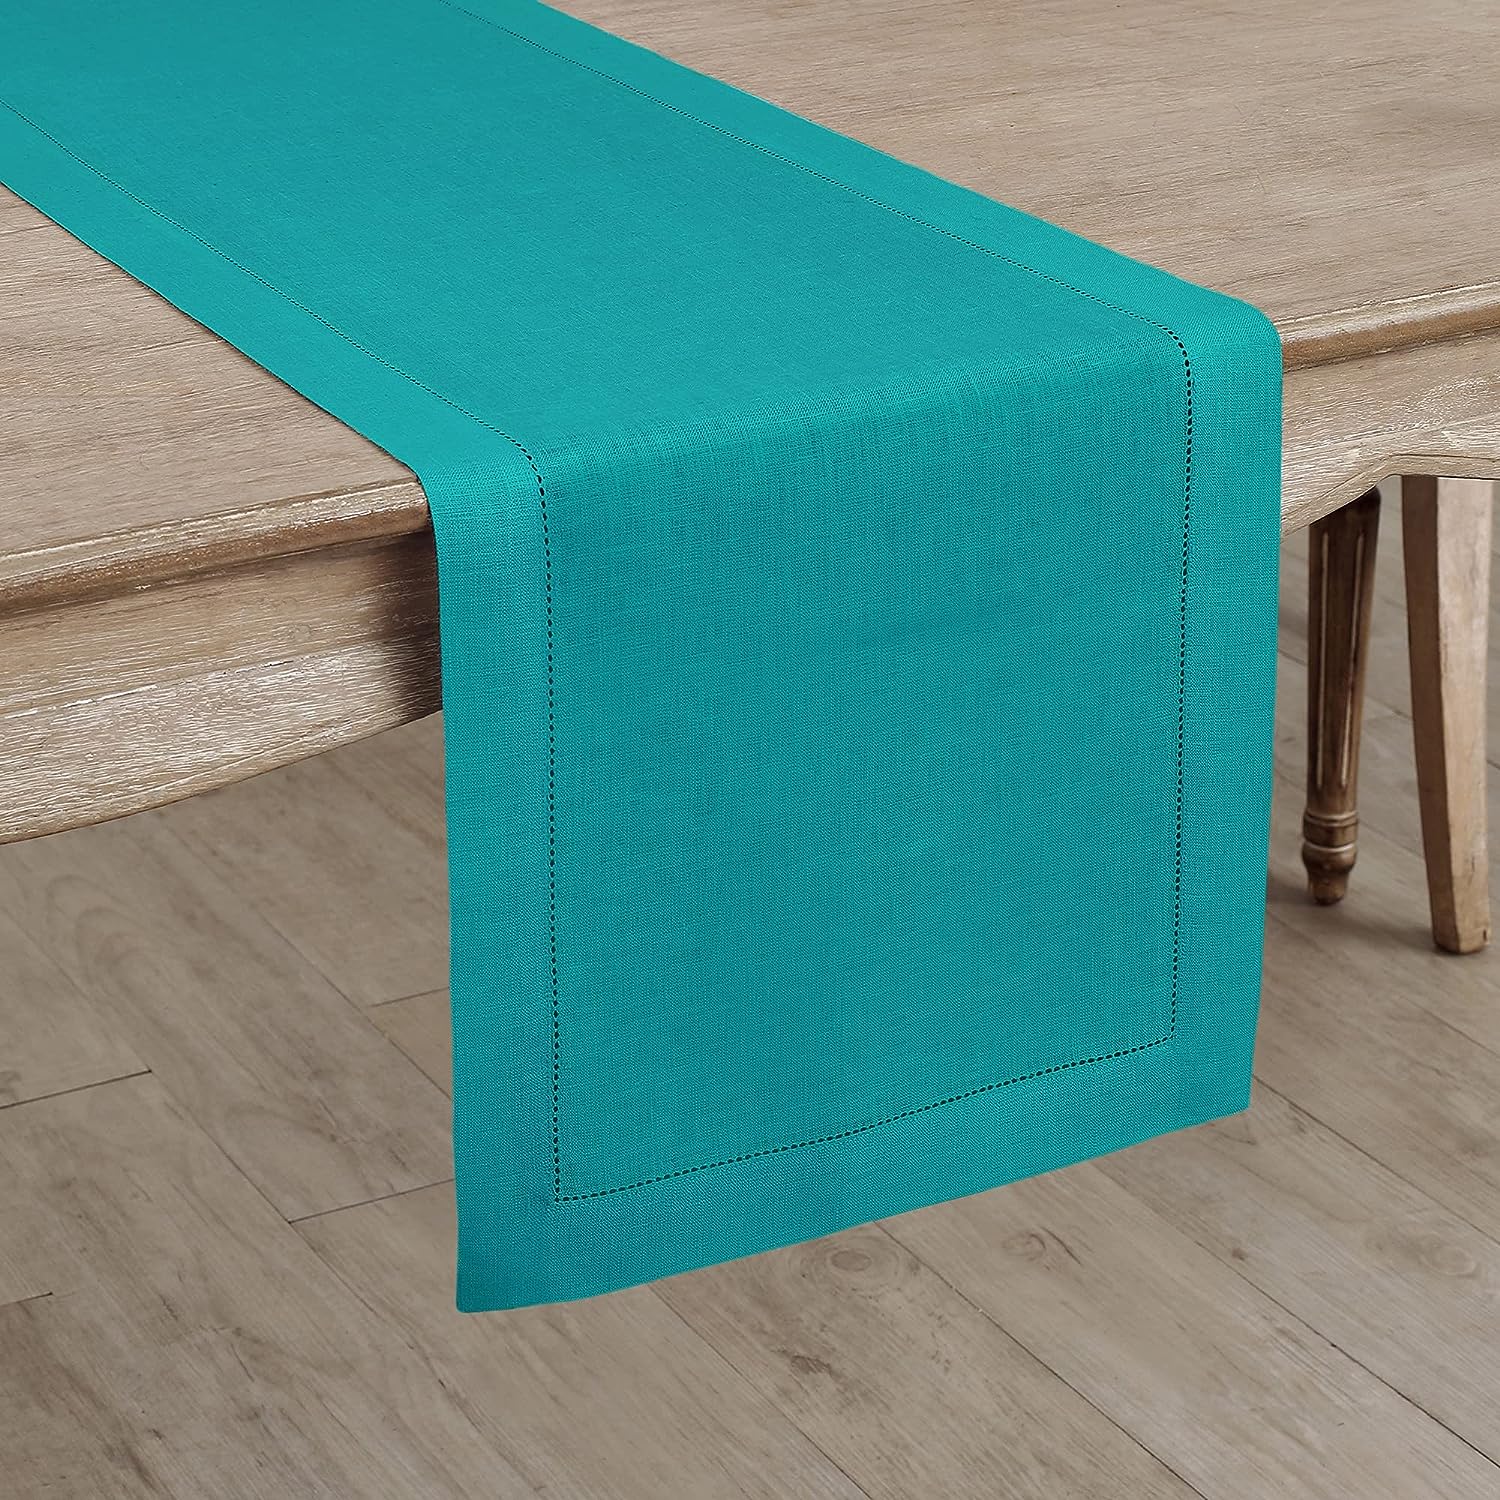 Hemstitched Table Linens (Teal Color)